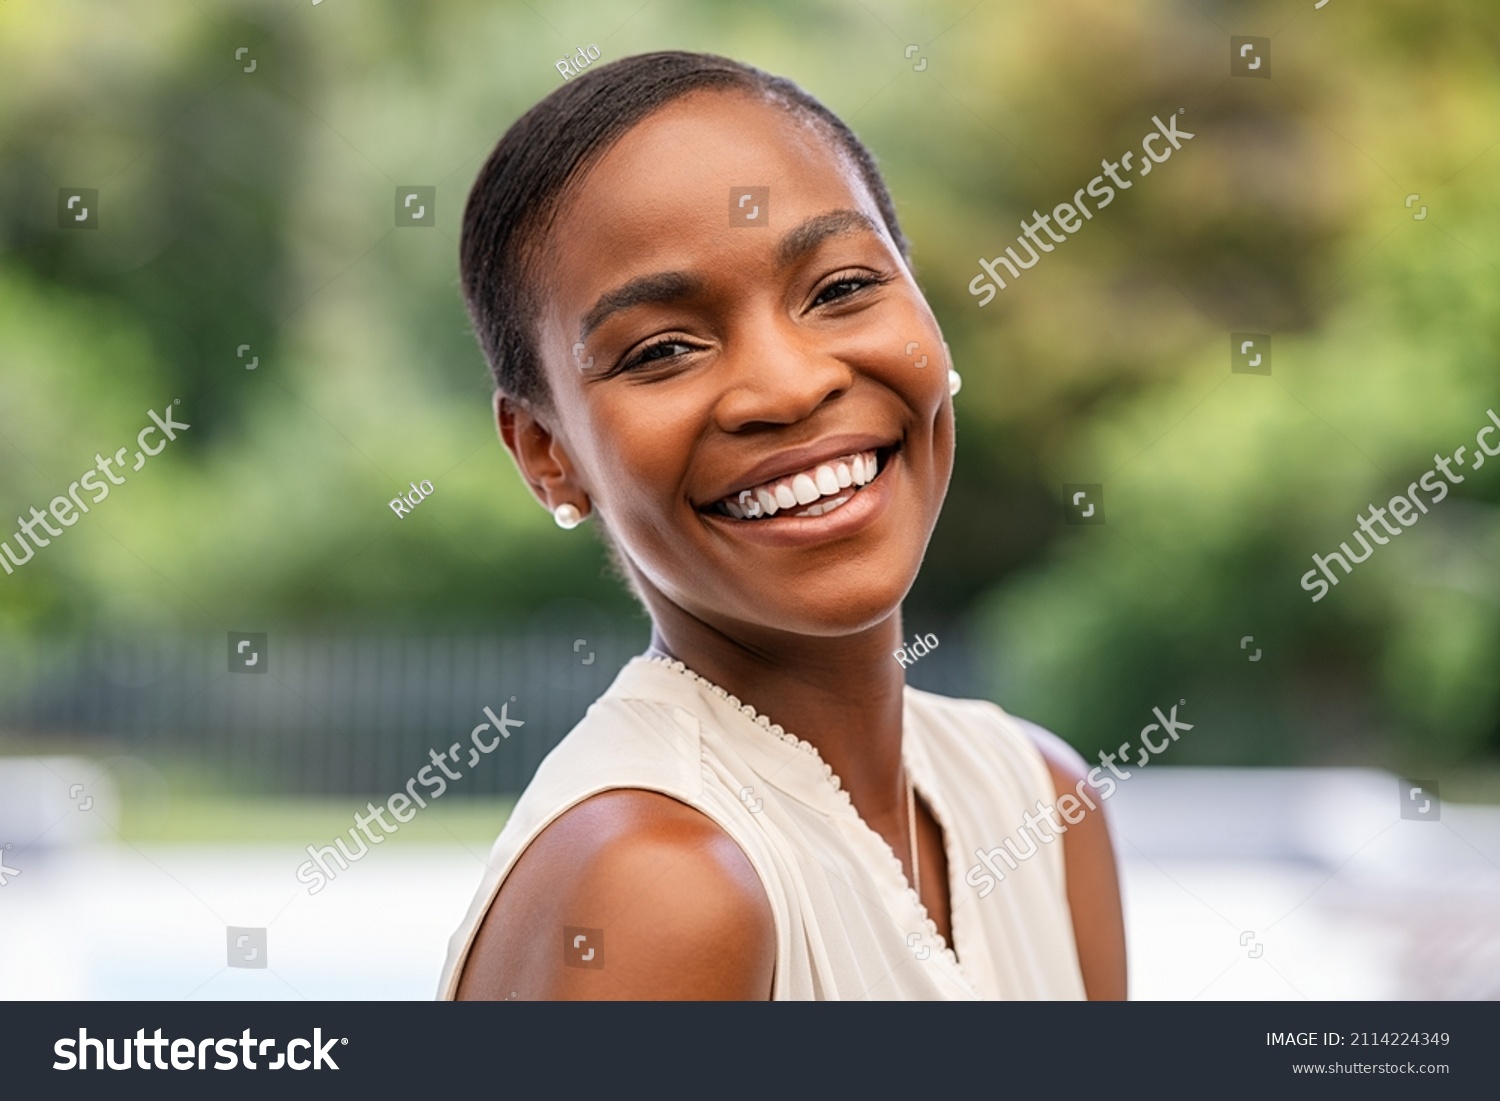 Portrait of smiling middle aged african woman looking at camera. Cheerful black mid adult woman smiling outdoor. Close up face of beautiful black lady laughing at park. #2114224349